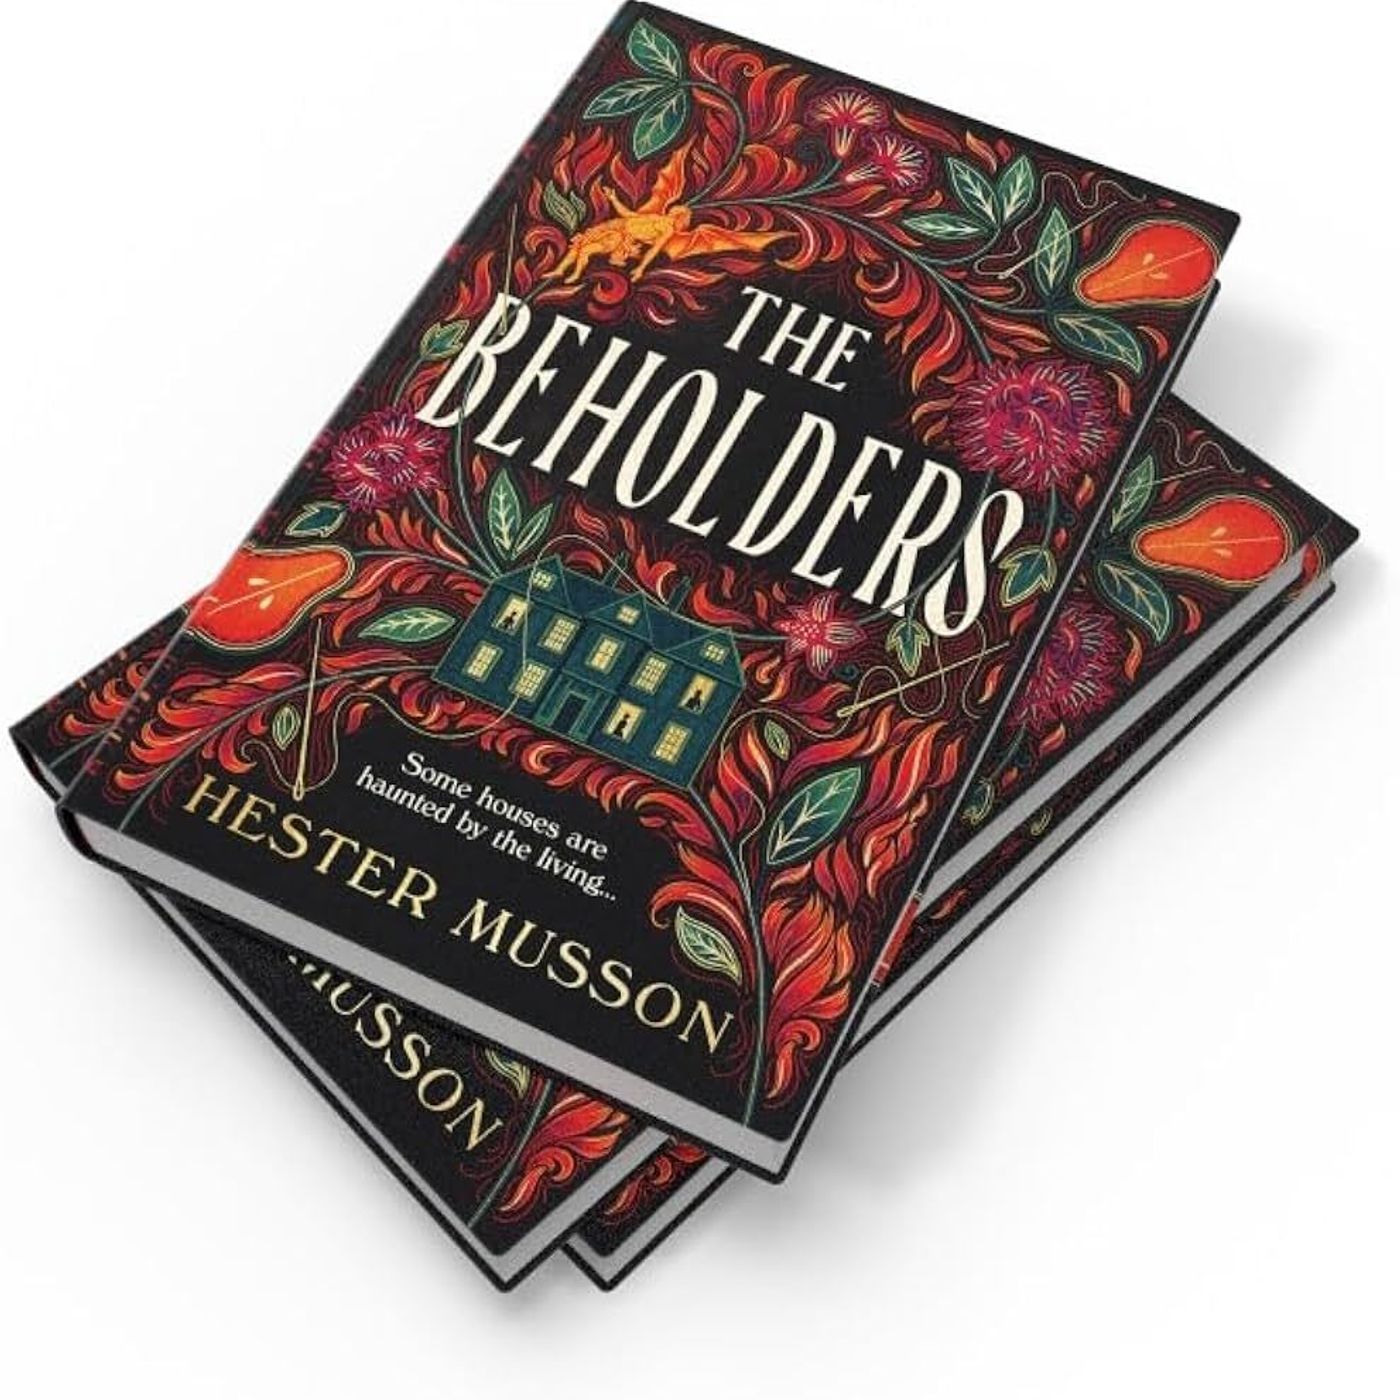 355: Hester Musson - The Beholders